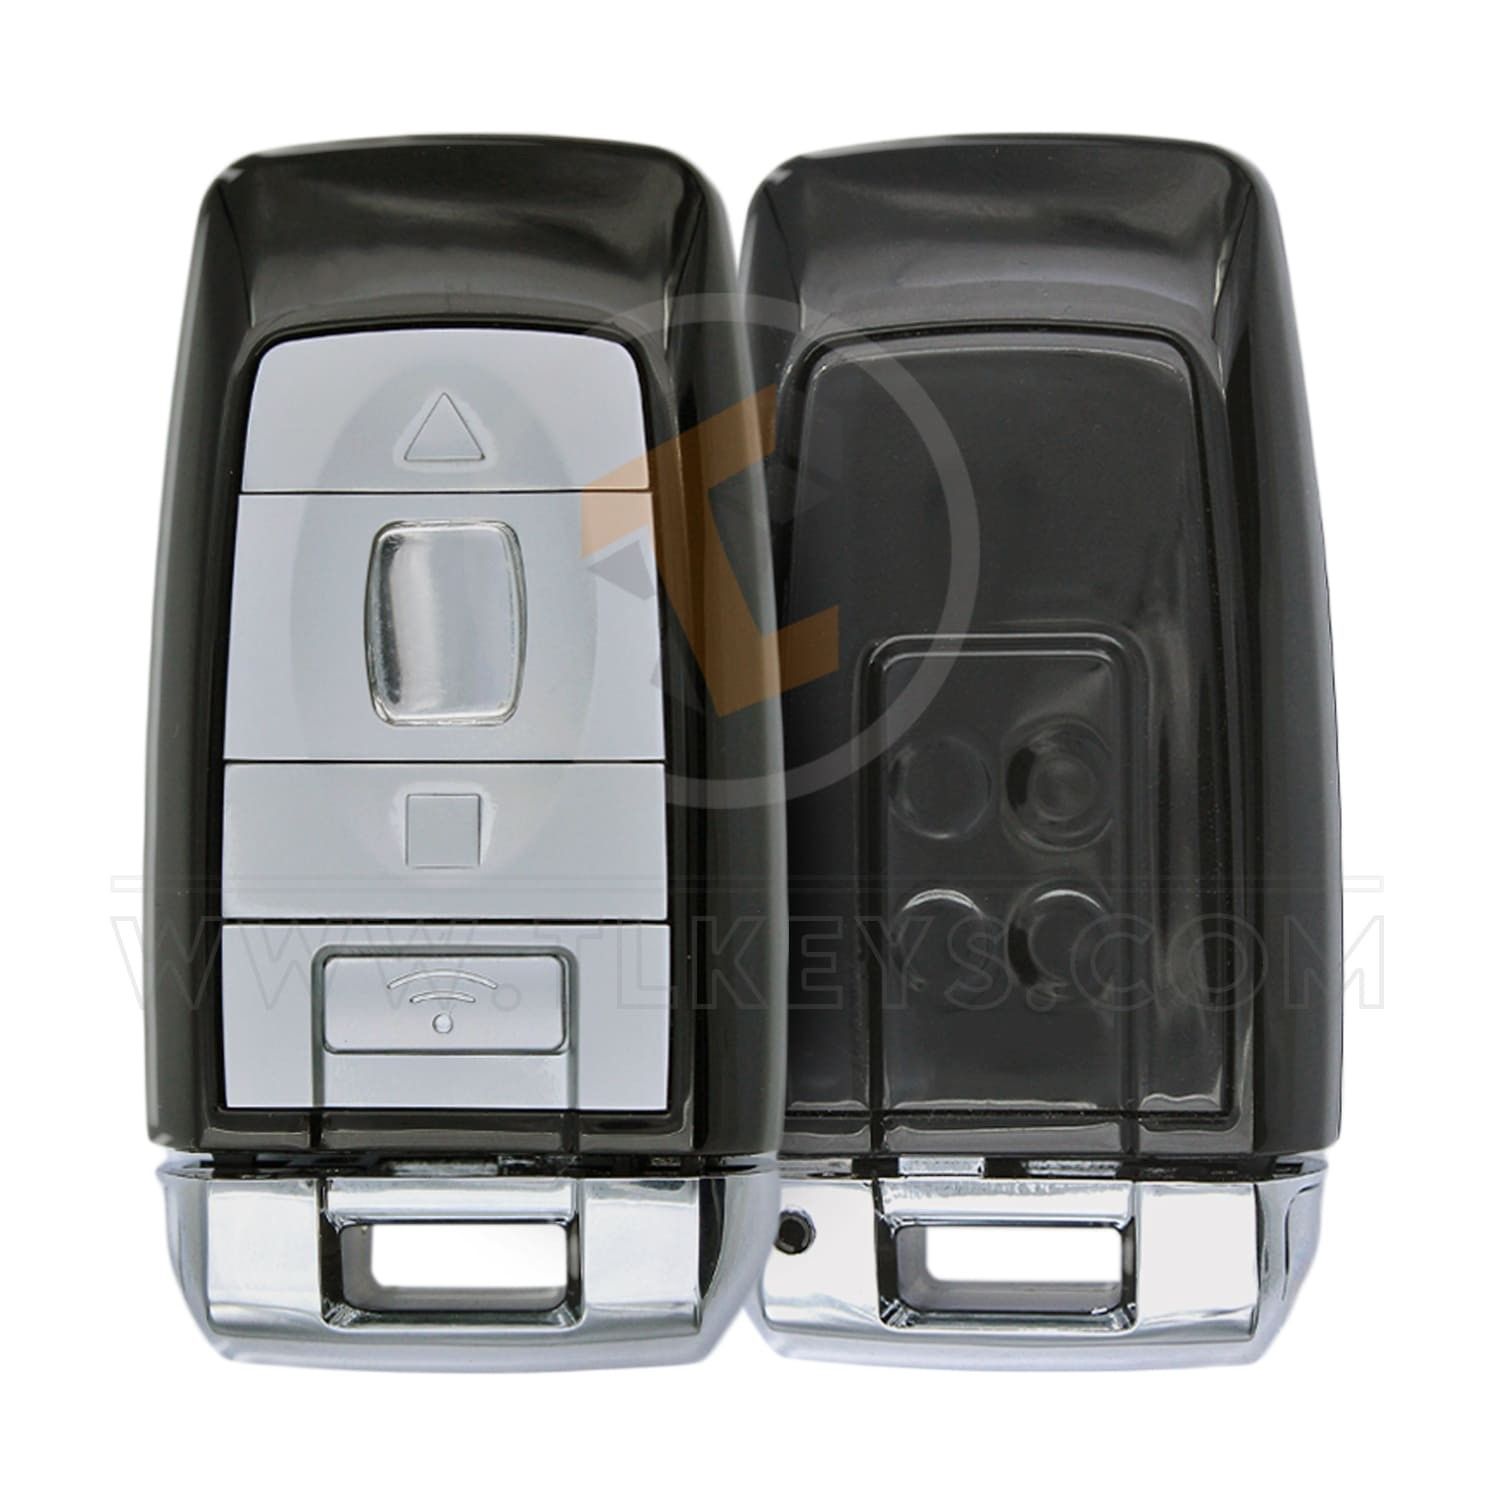 Rolls Royce 2009-2016 Key Remote Shell 4 Buttons Aftermarket Brand Status Aftermarket